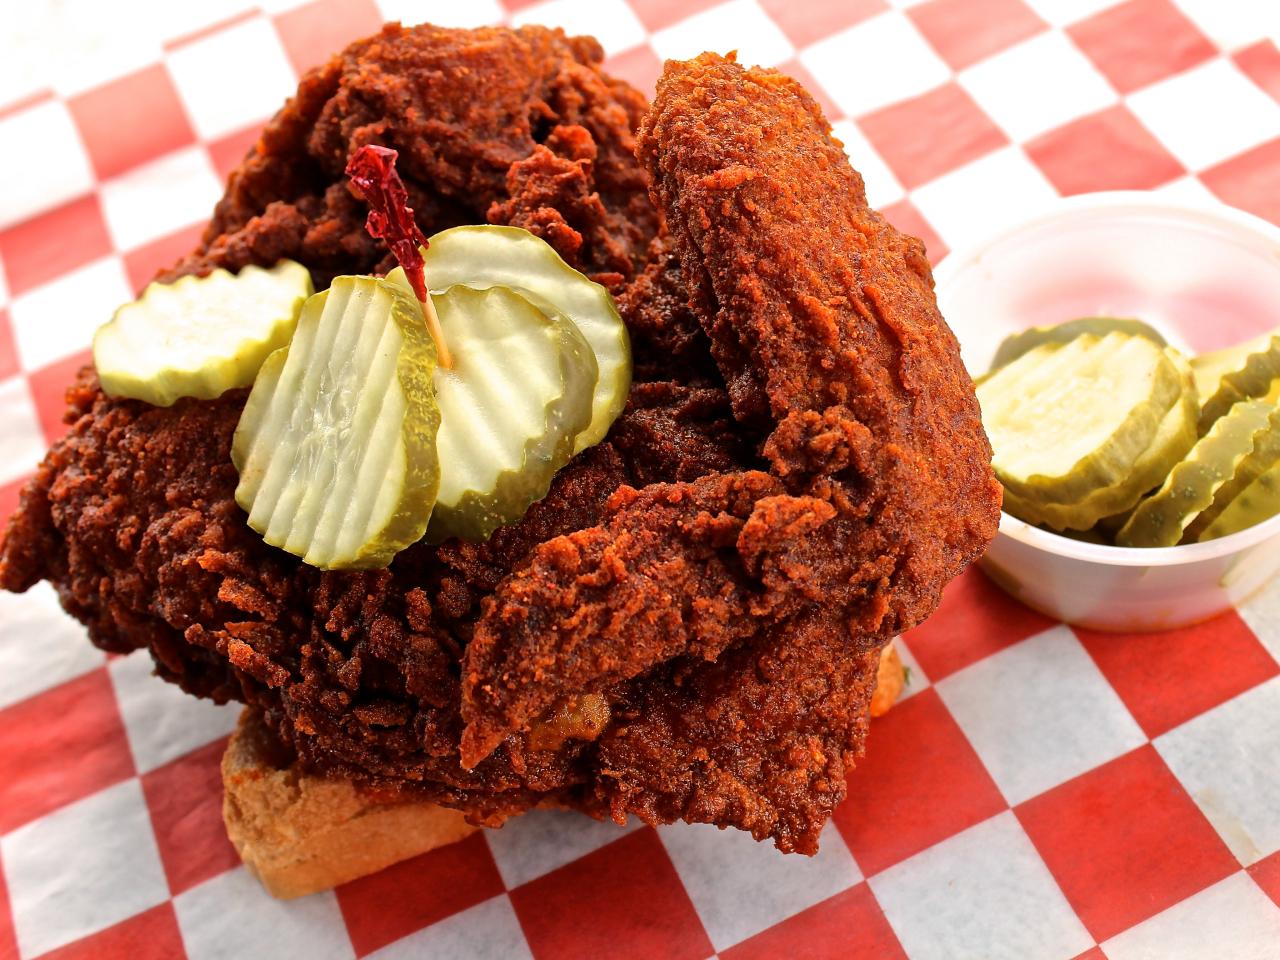 These 10 restaurants make the list for best fried chicken in